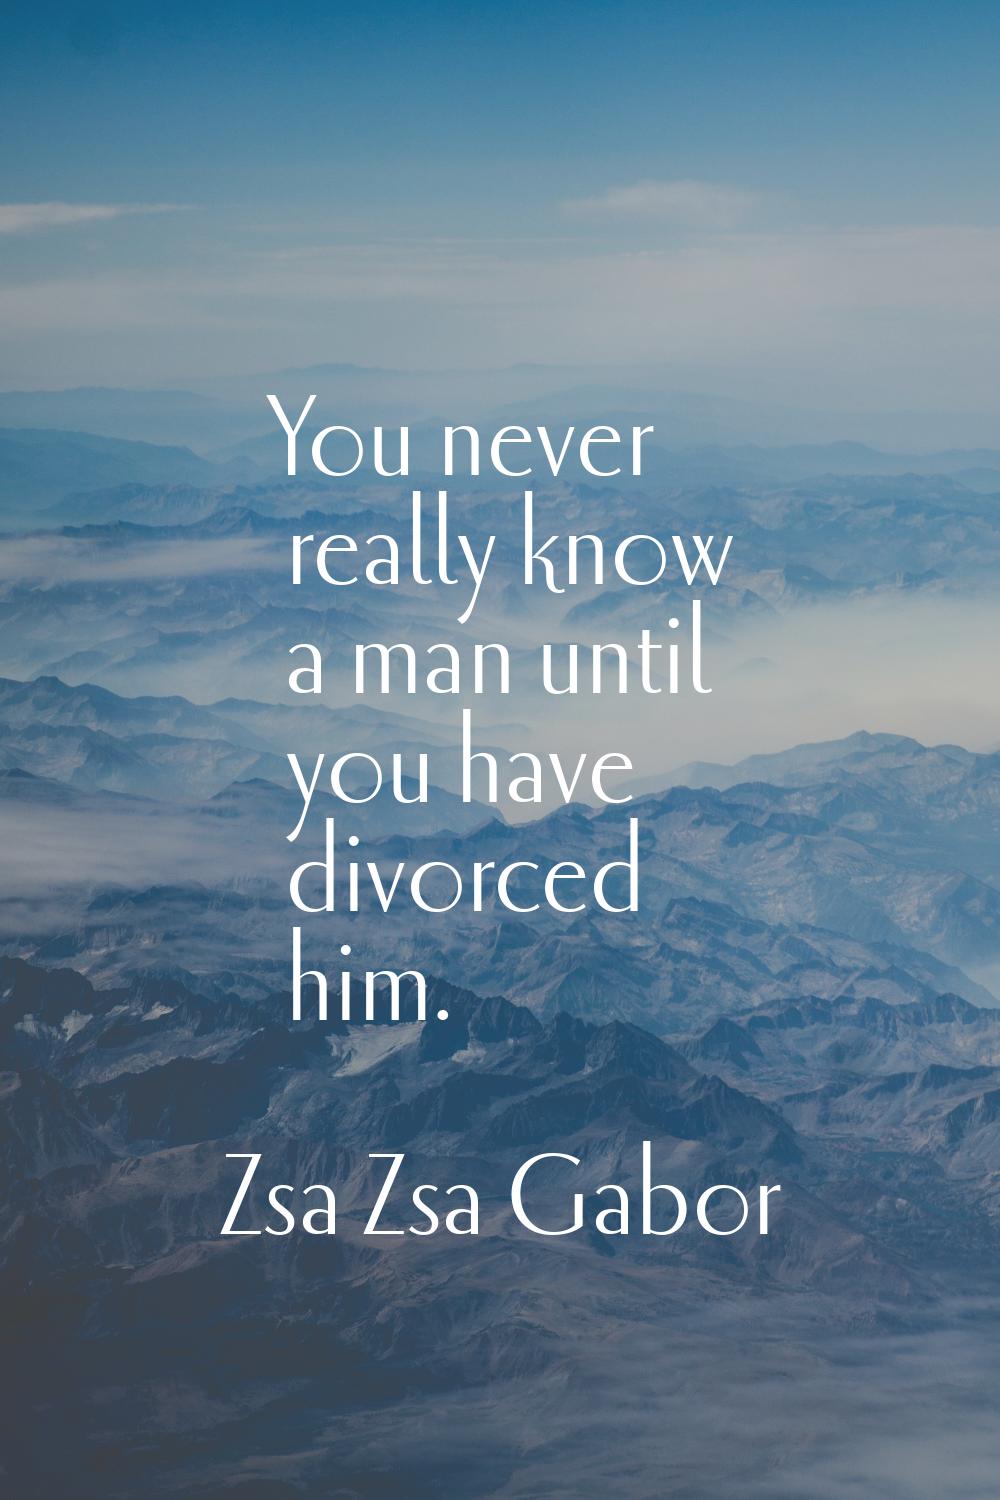 You never really know a man until you have divorced him.